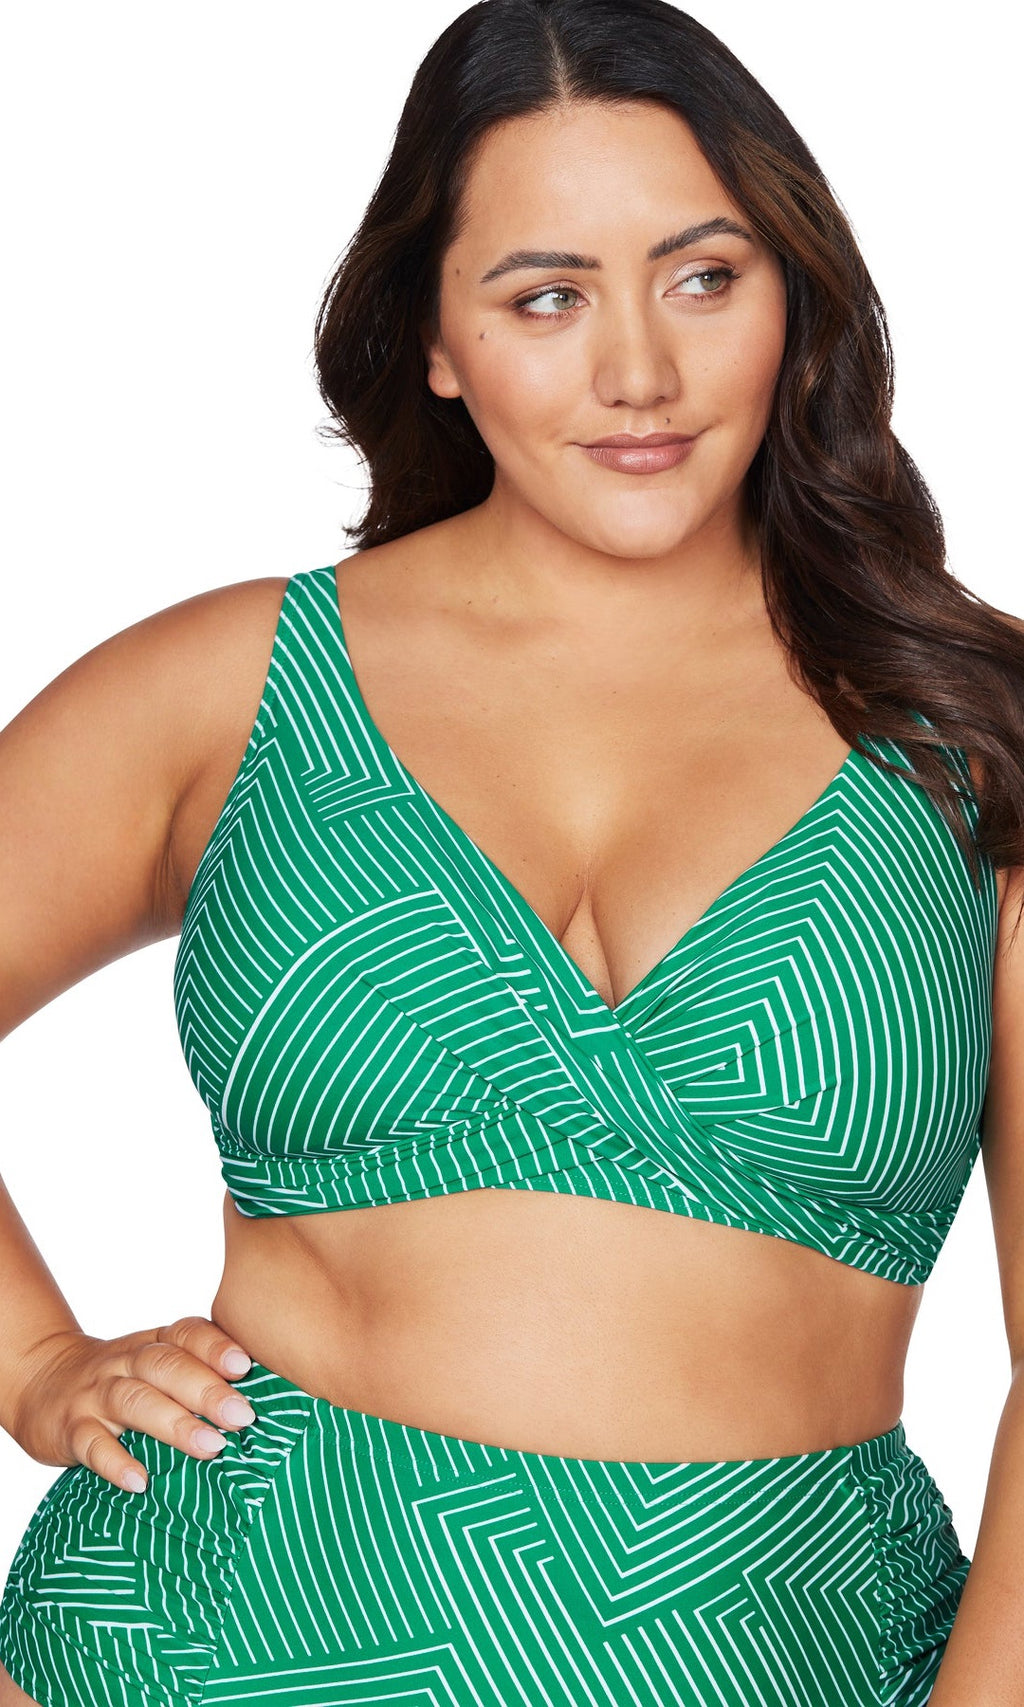 Linear Perspective Green Delacroix Bikini Top, Multifit D Cup to G Cup